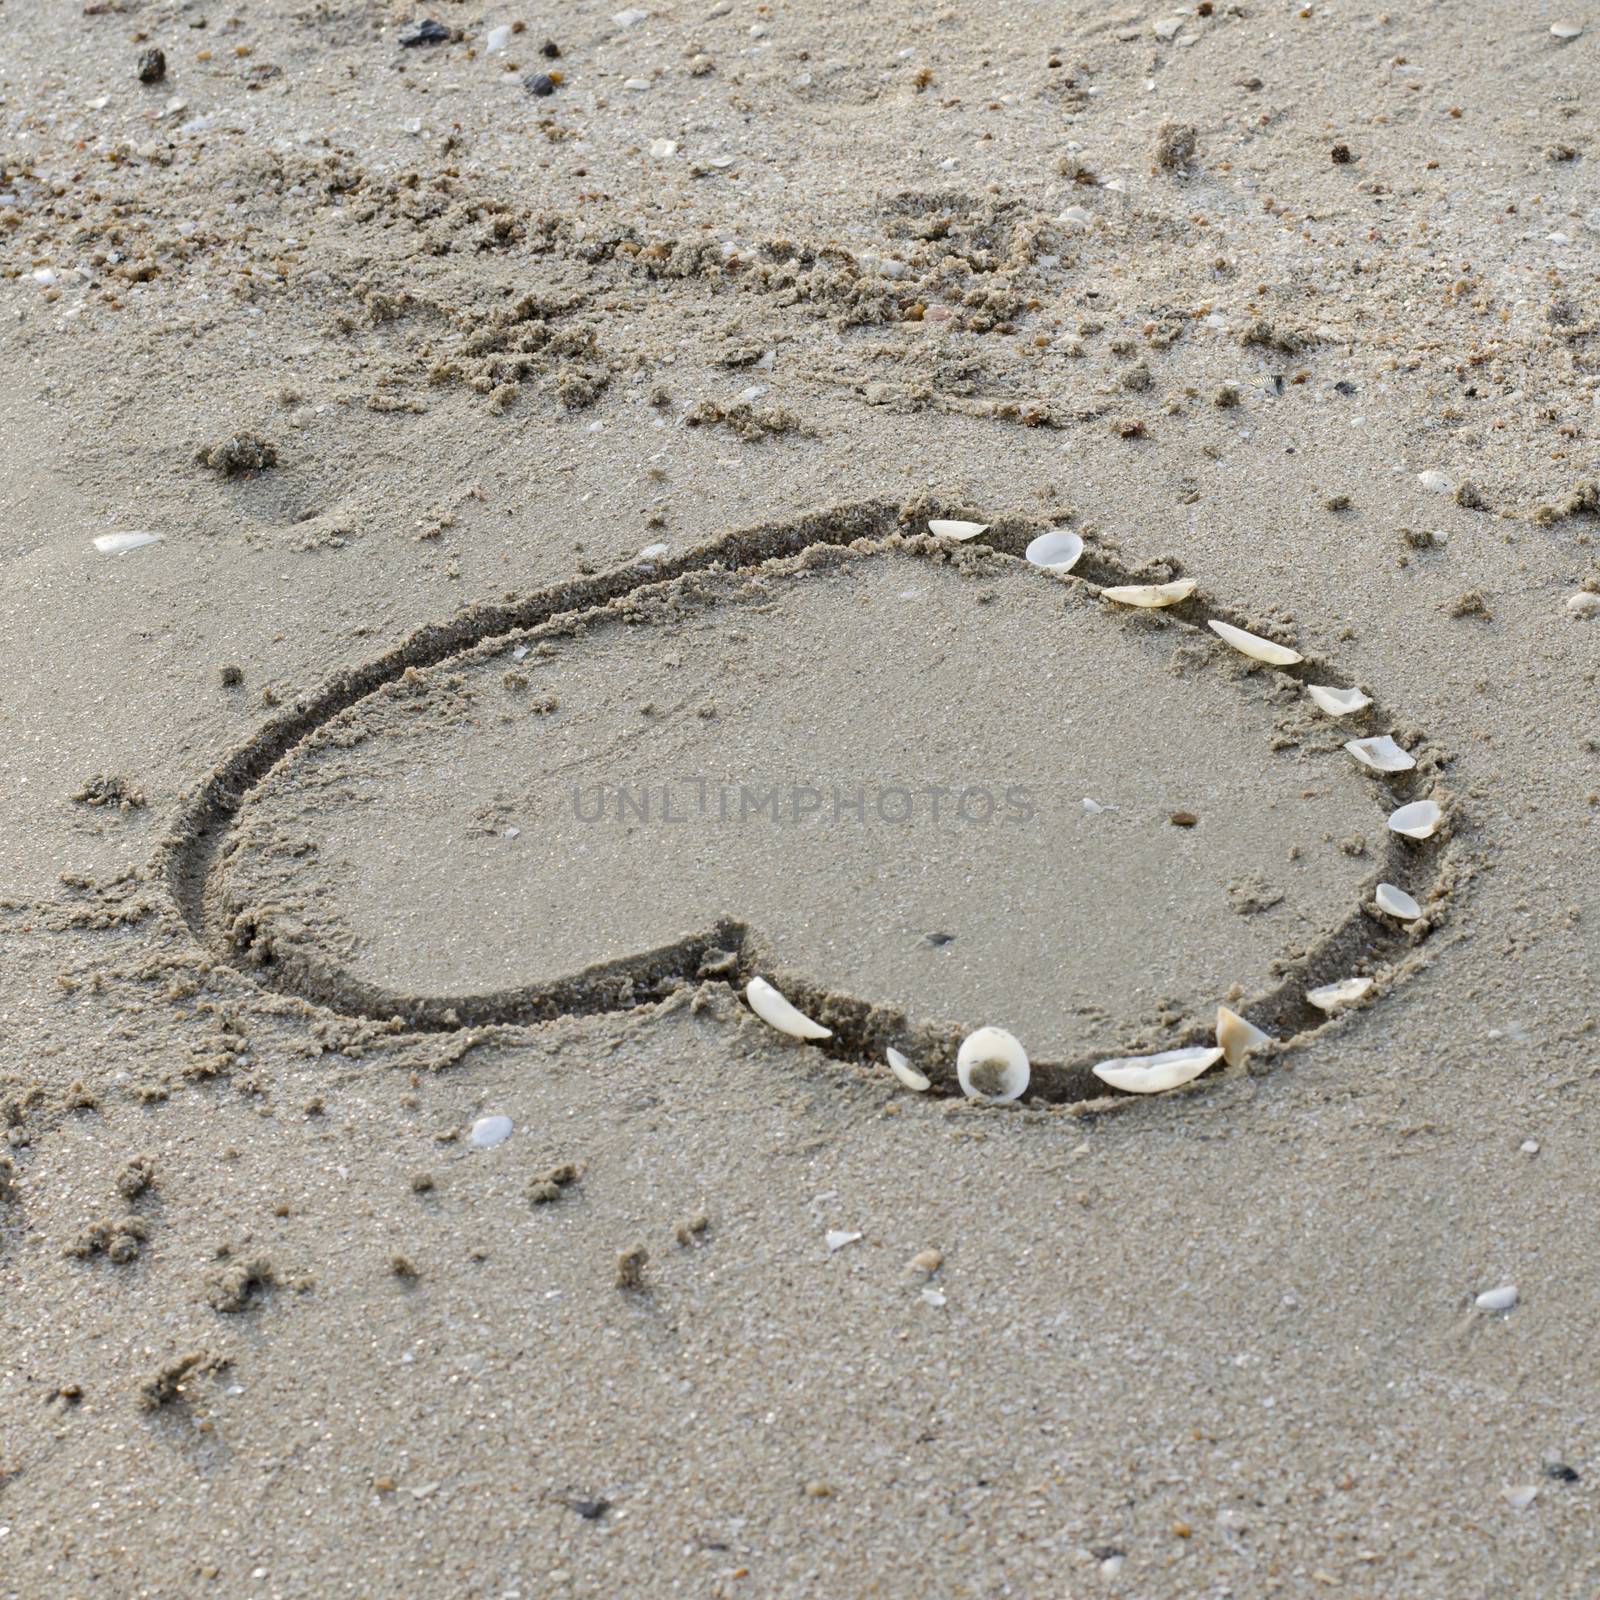 a heart on the sand in the beach by ammza12